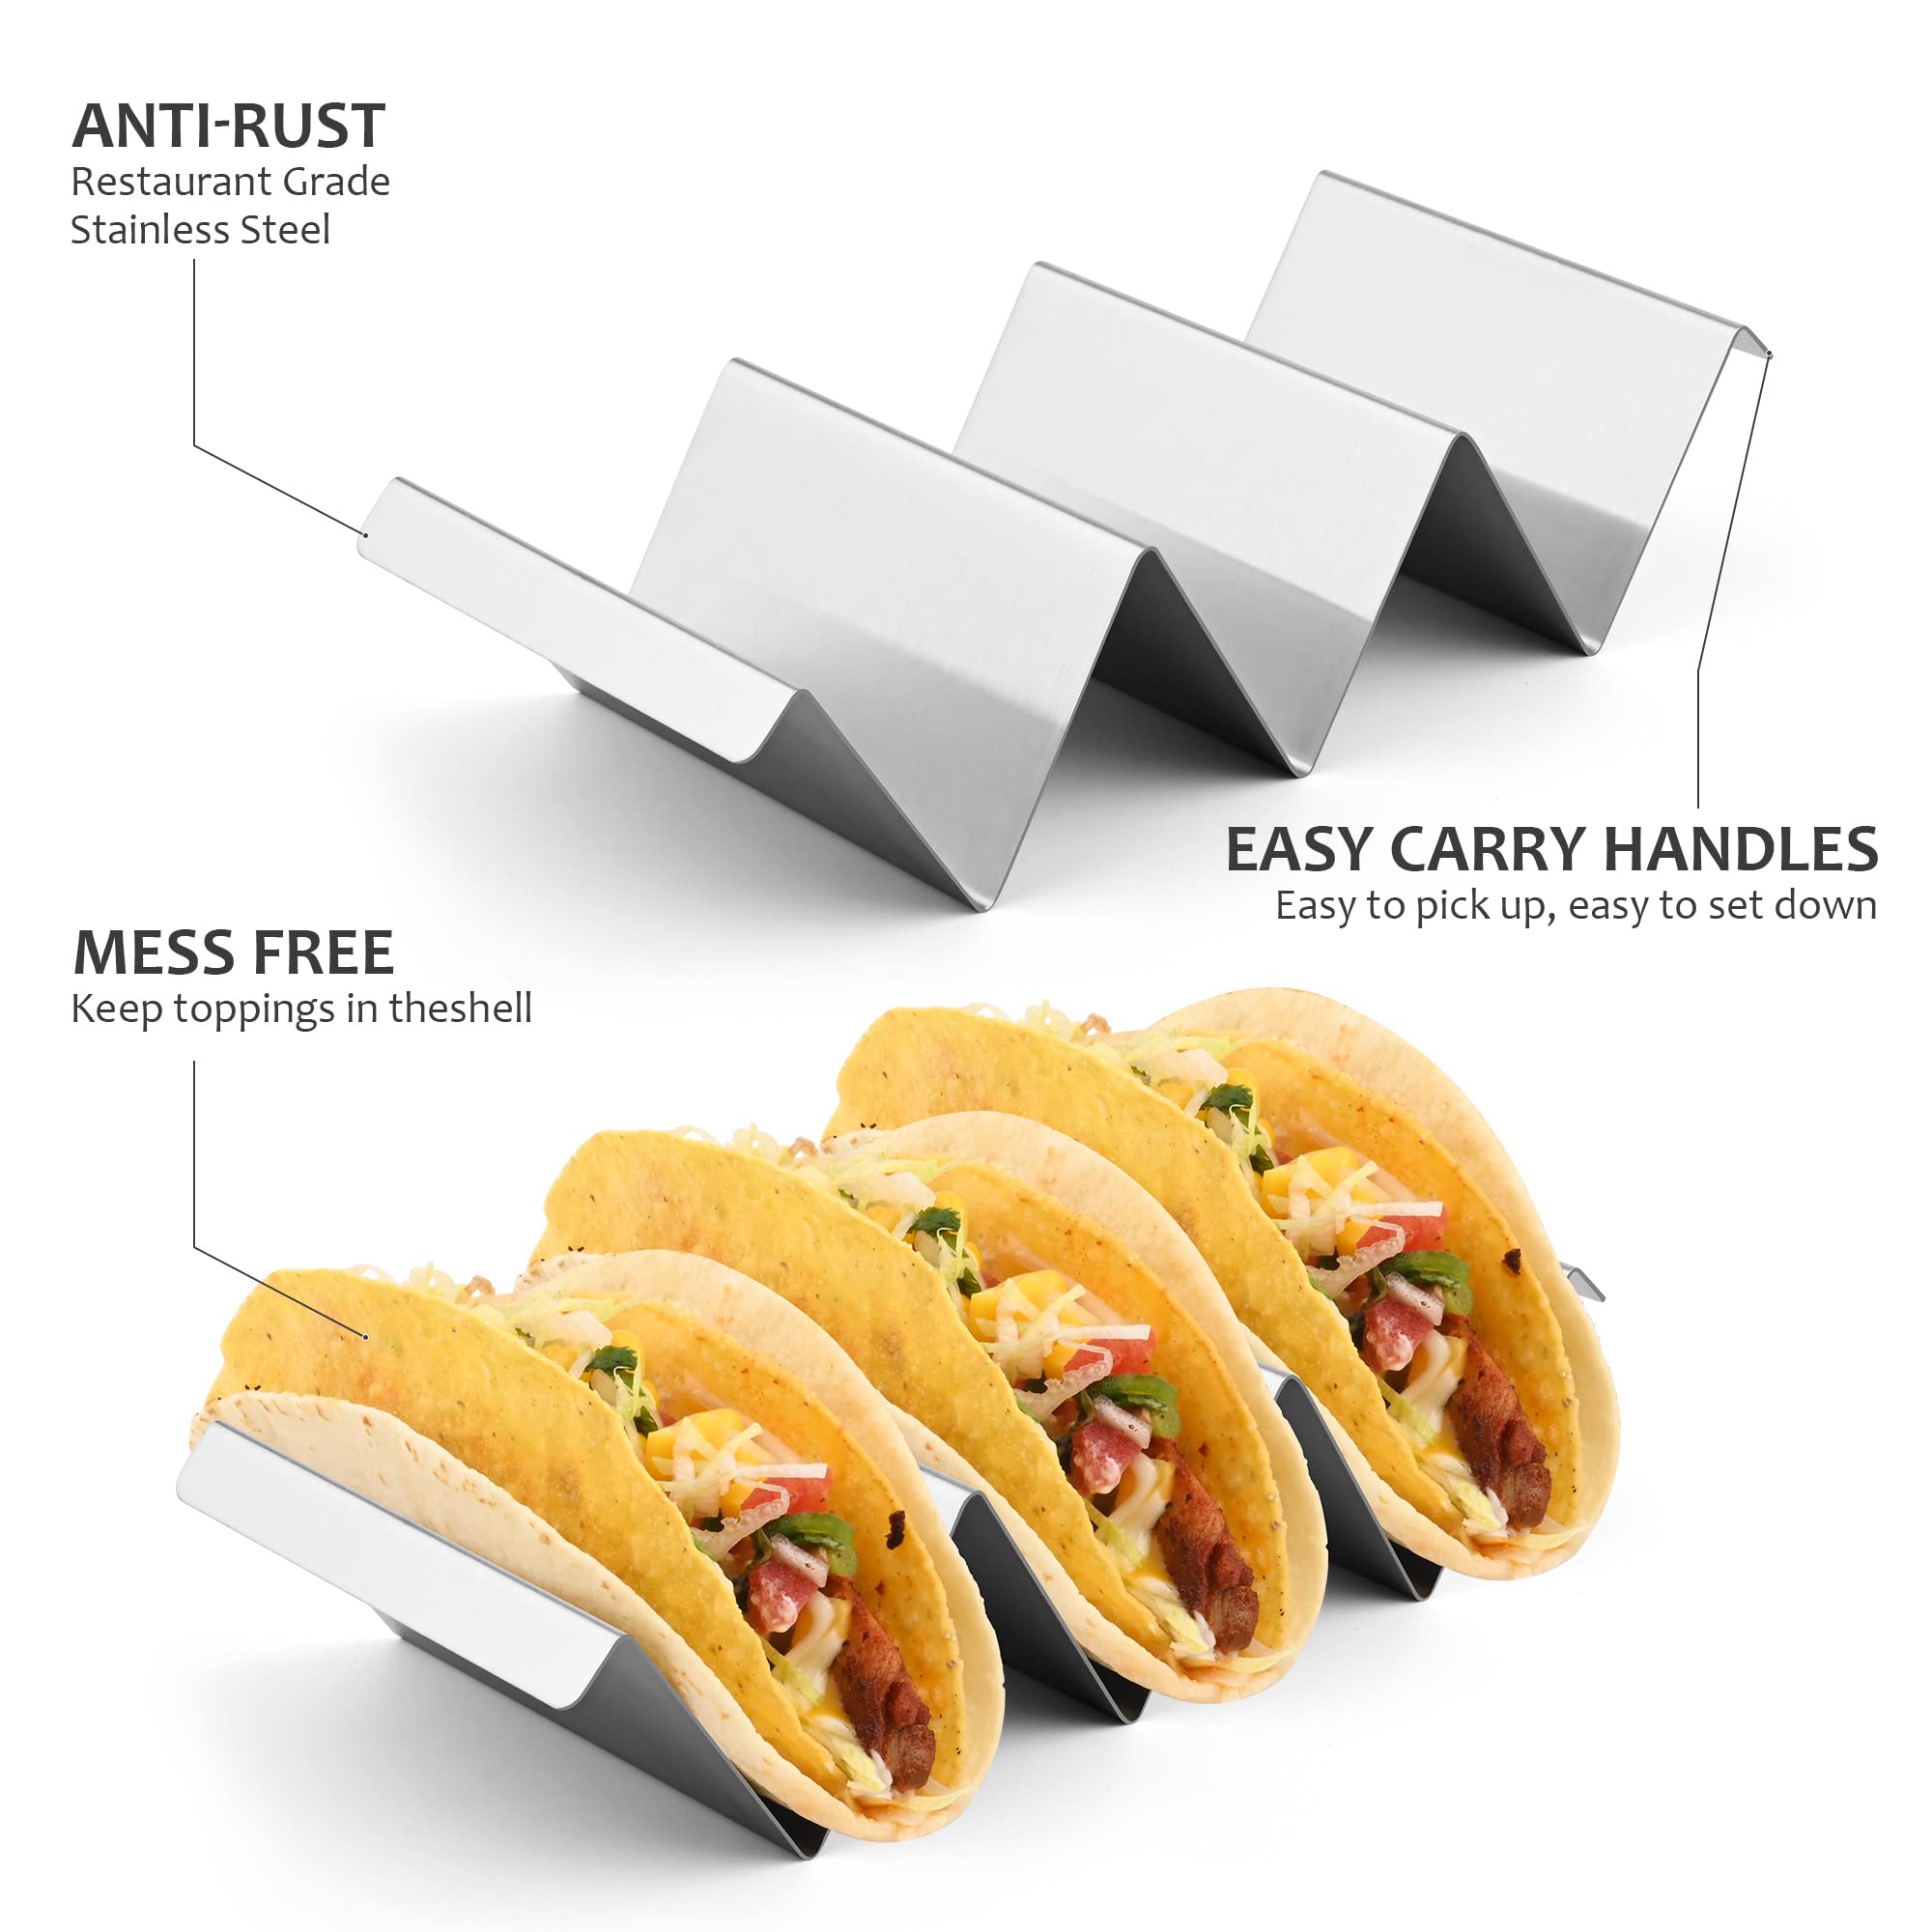 Smithcraft Taco Holder, Stainless Steel Taco Holders Stand Set 2, Metal Taco Shell Holder Mold, Oven Grill Safe Taco Rack Tray Holder With Handle, Fill Serve Holds Up to 3 Tacos Each Taco Plate